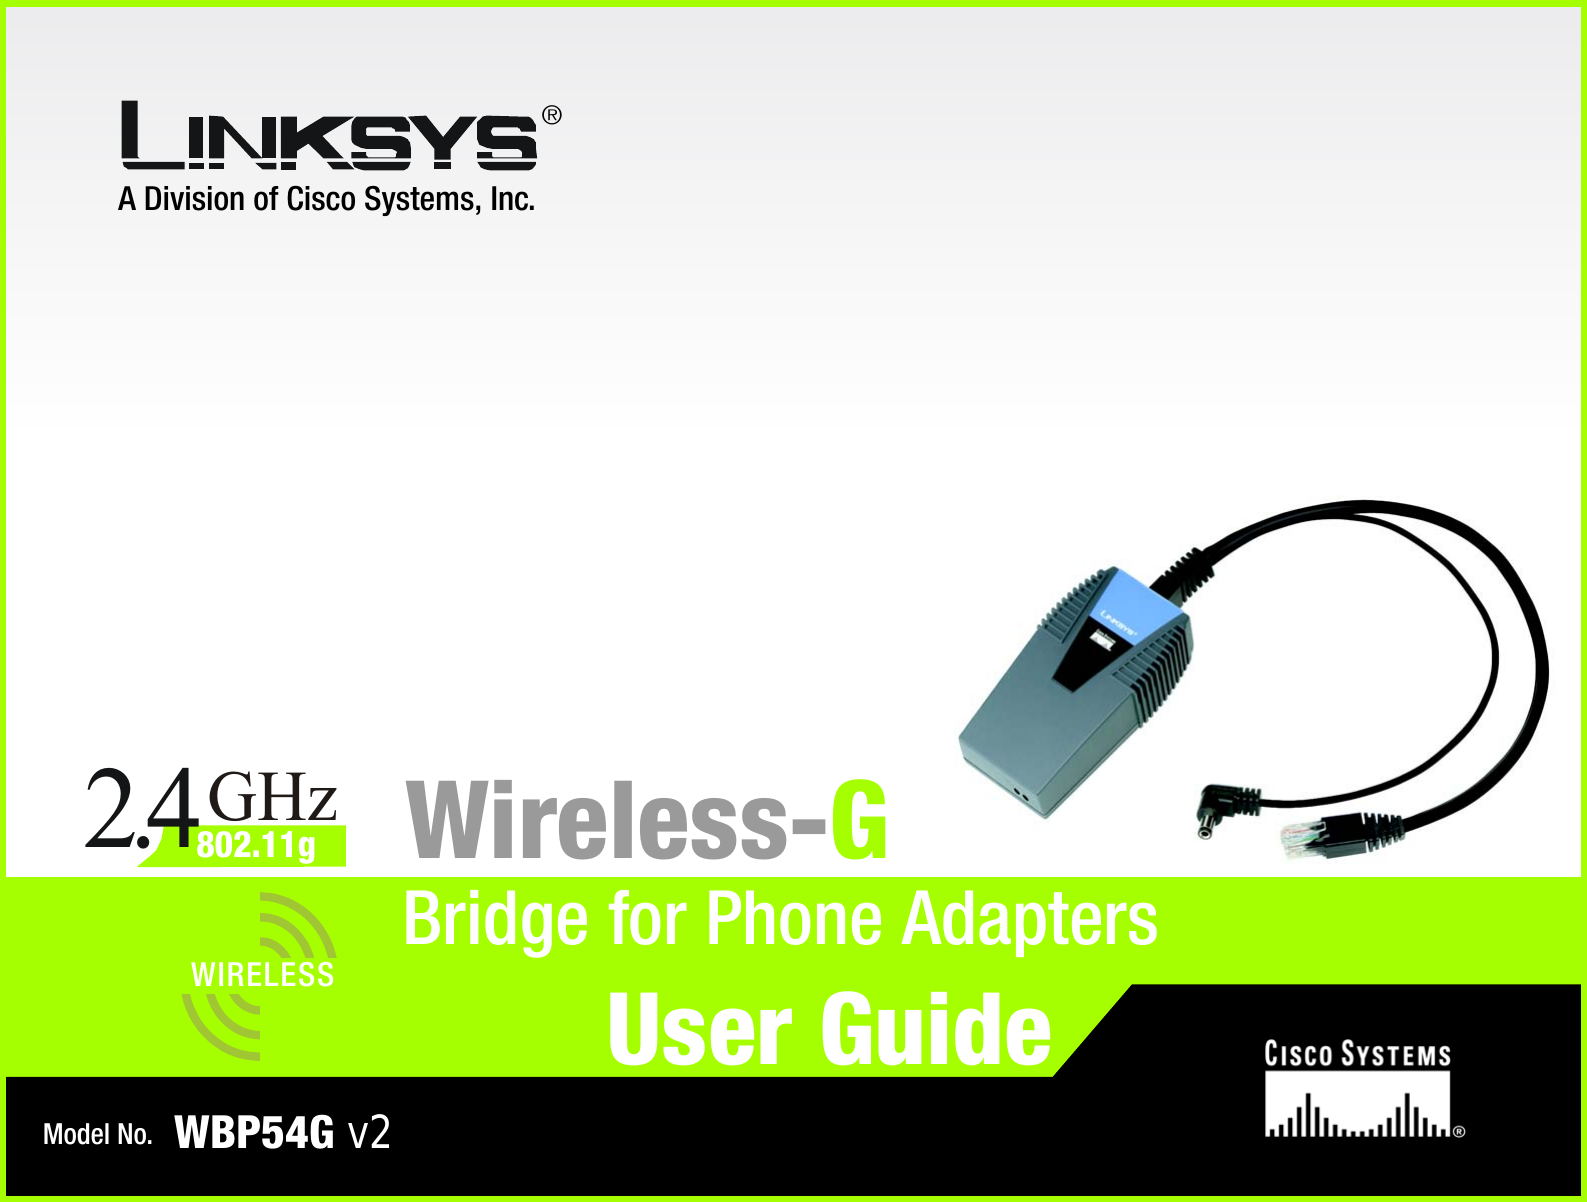 A Division of Cisco Systems, Inc.®Model No.Bridge for Phone AdaptersWireless-GWBP54G v2User GuideWIRELESSGHz2.4802.11g